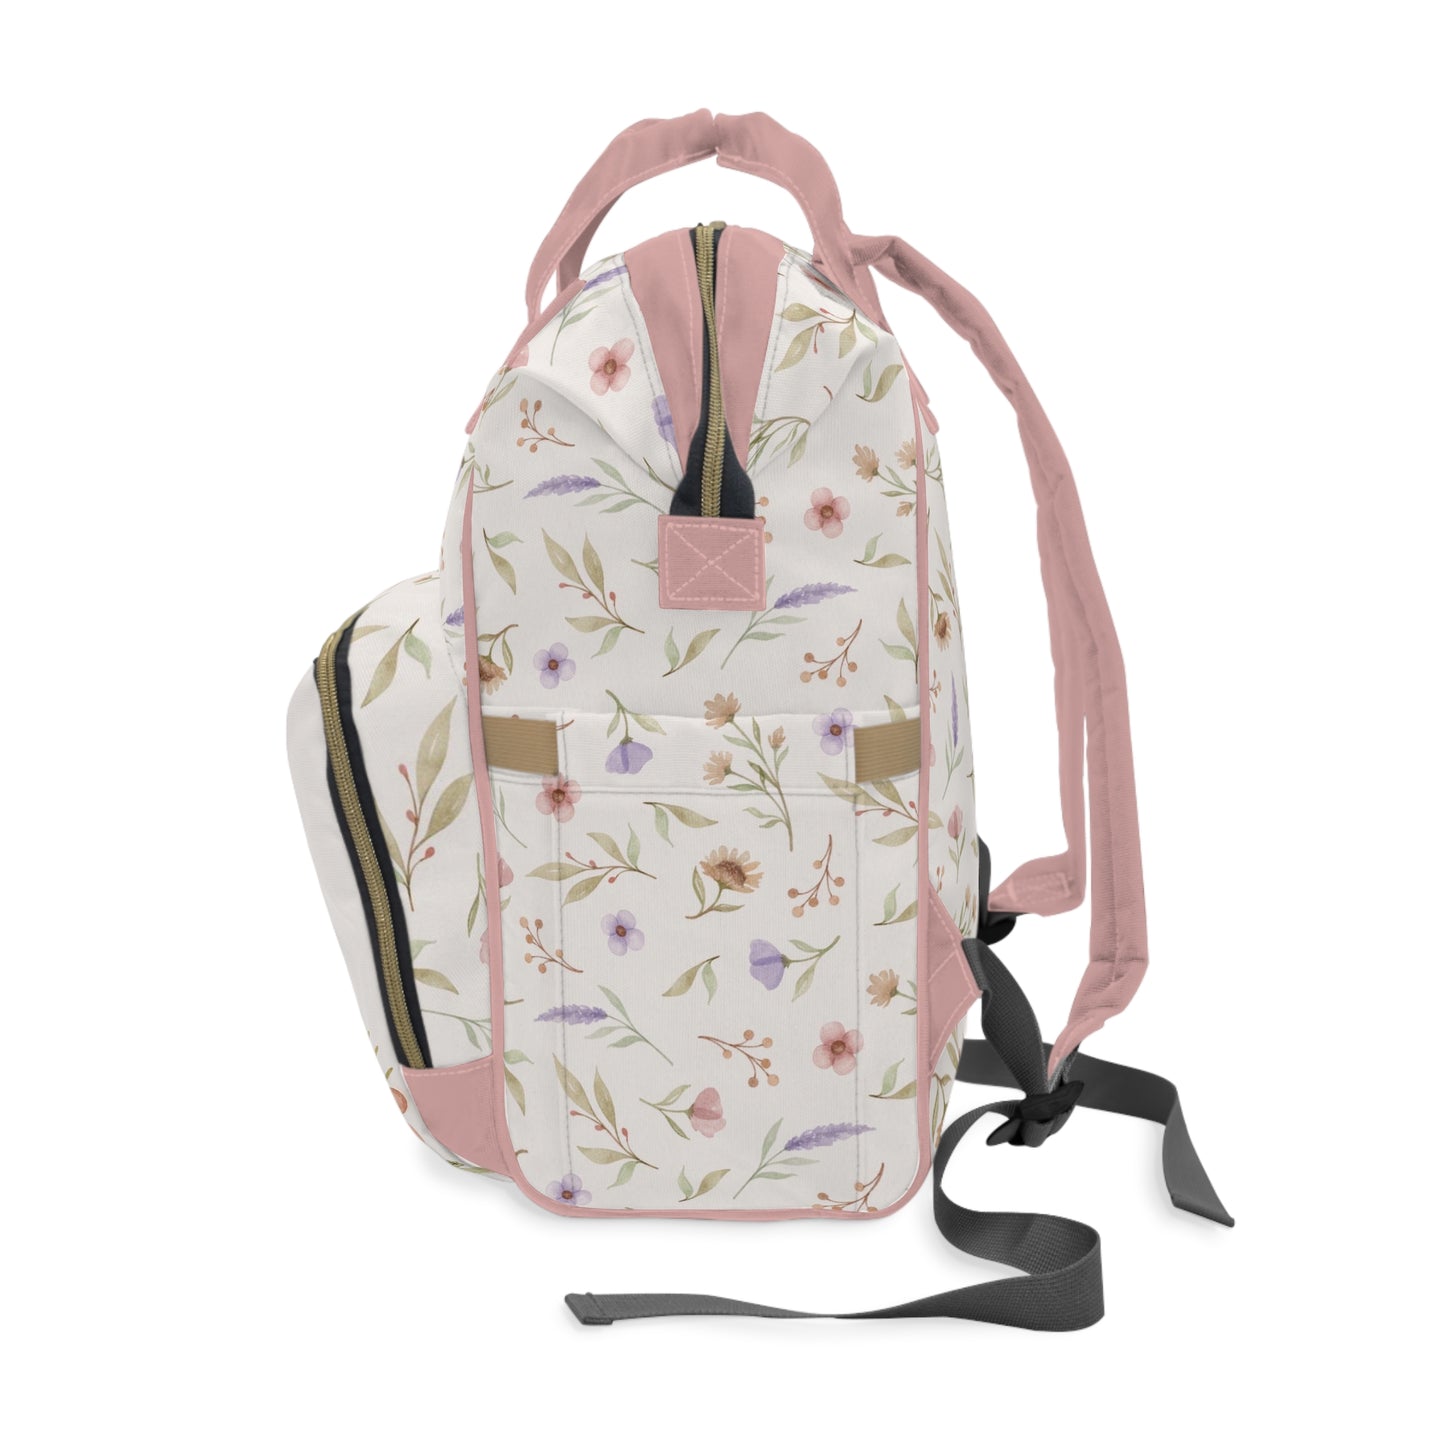 Personalized Woodland diaper bag | Forest animals baby backpack - Baby woodland